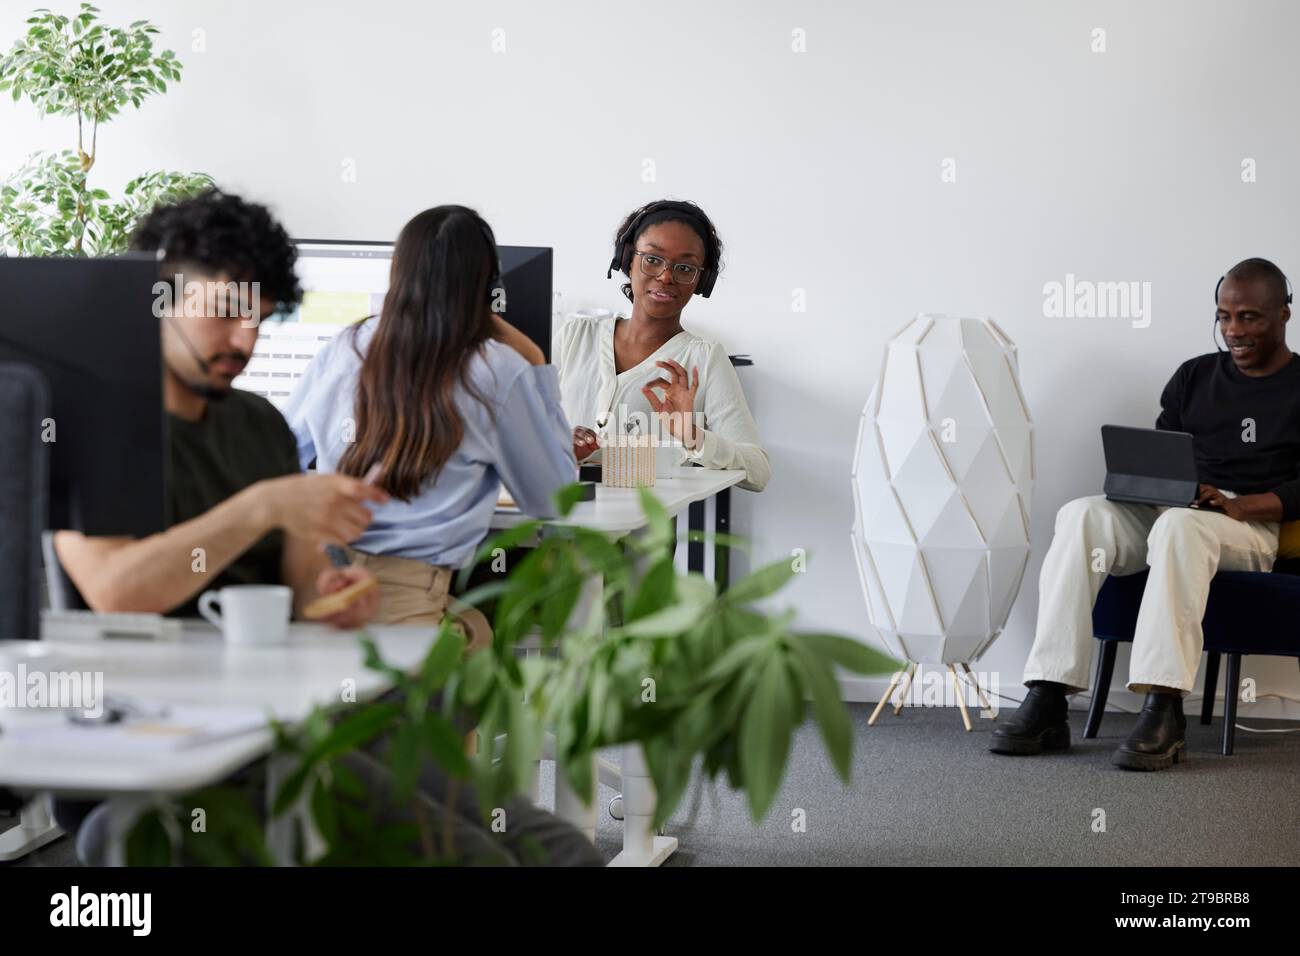 People sitting and using computers in office Stock Photo